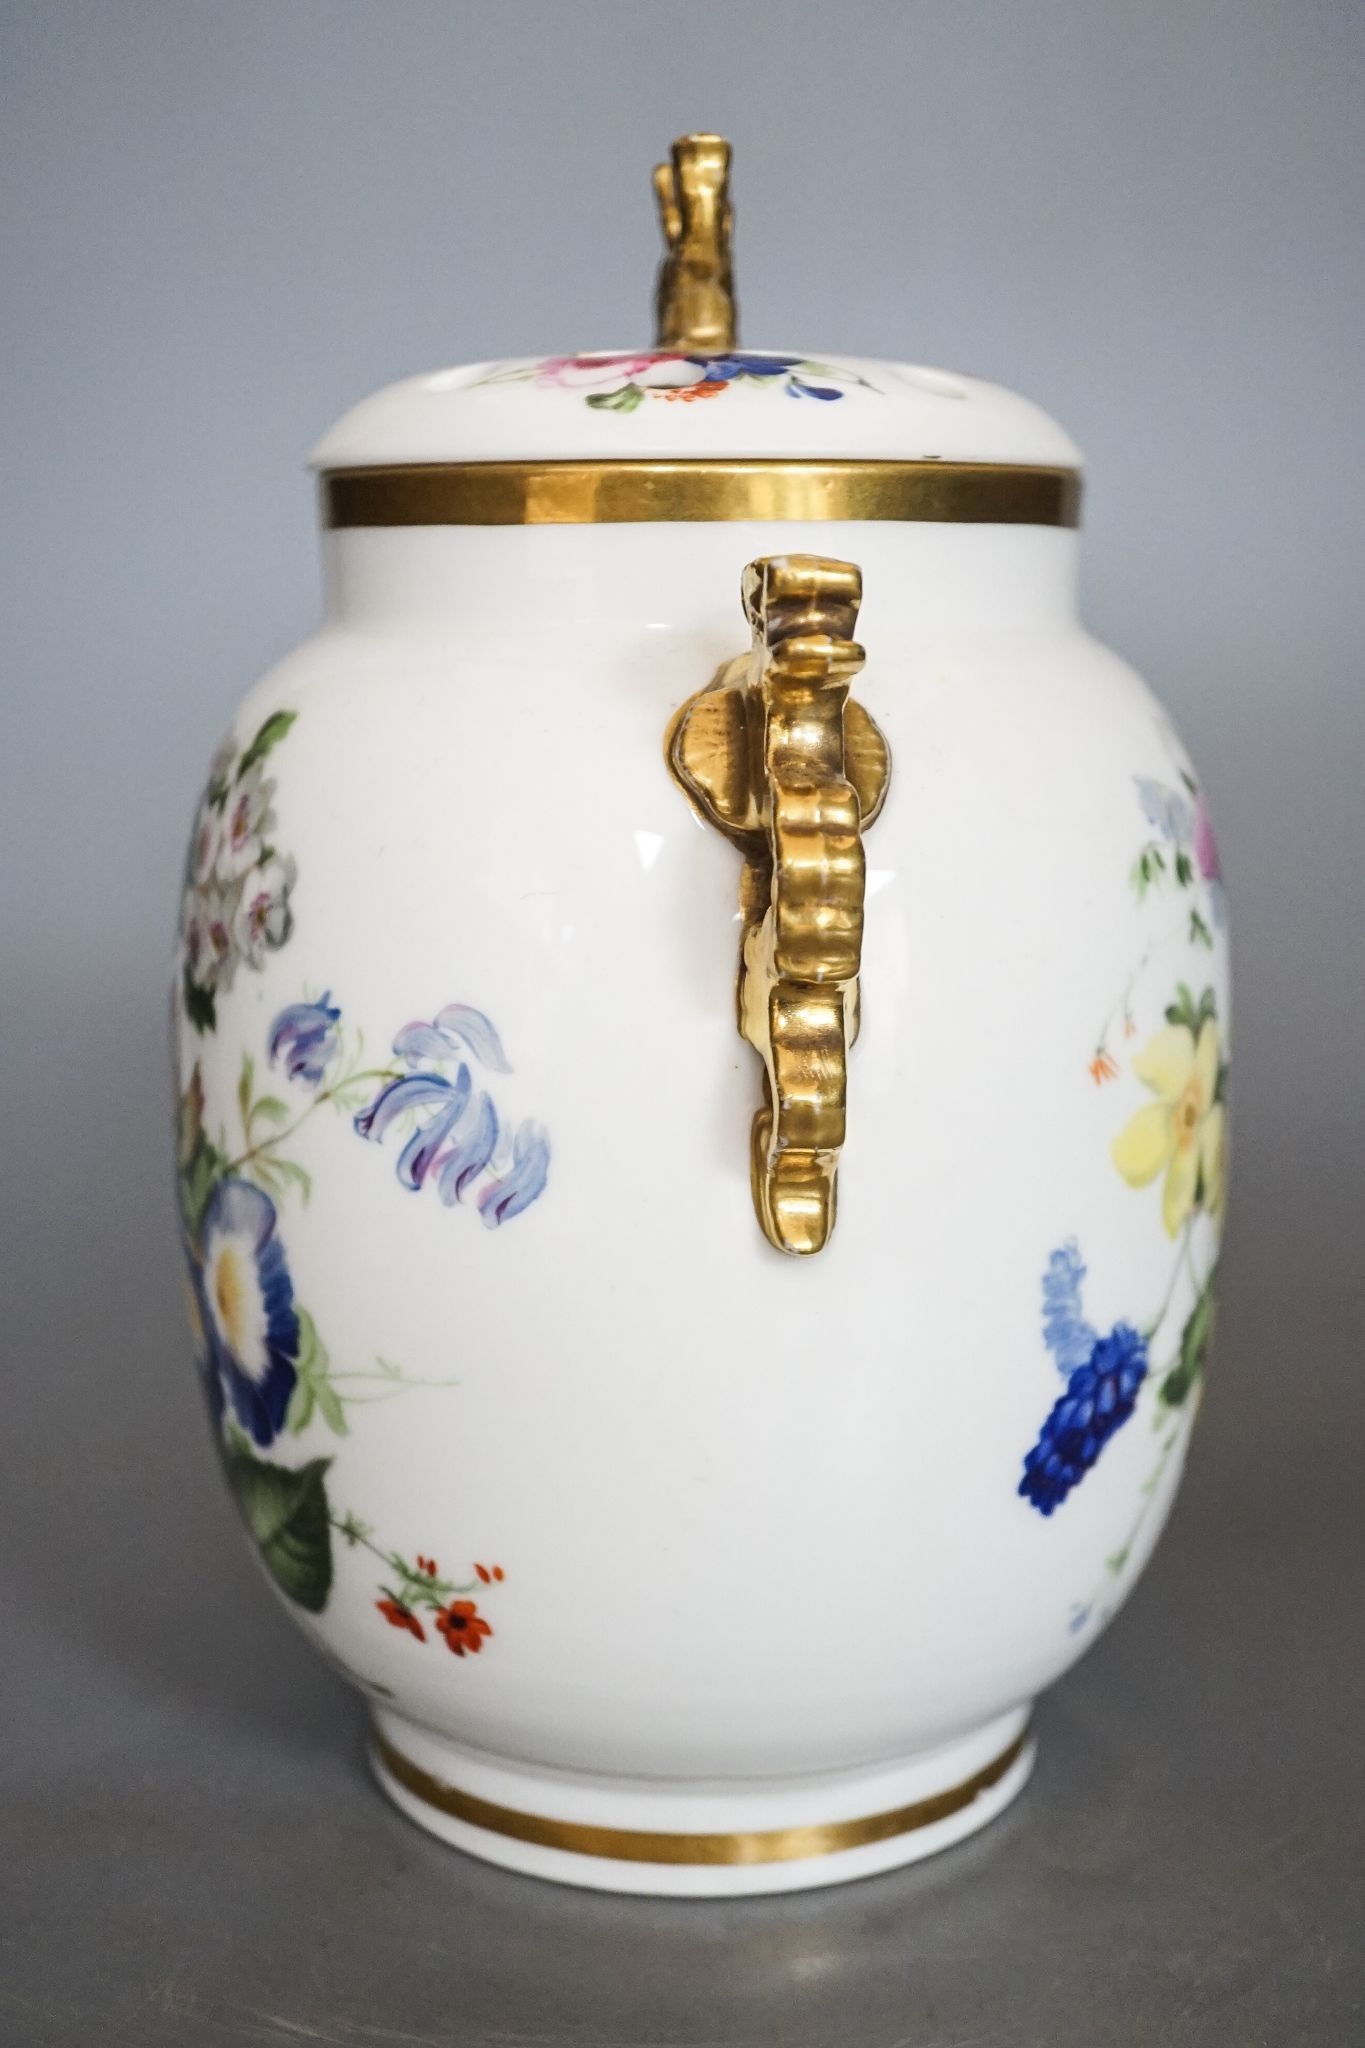 An English porcelain pot pourri vase, cover and inner cover, probably Coalport, painted with roses - Image 5 of 7